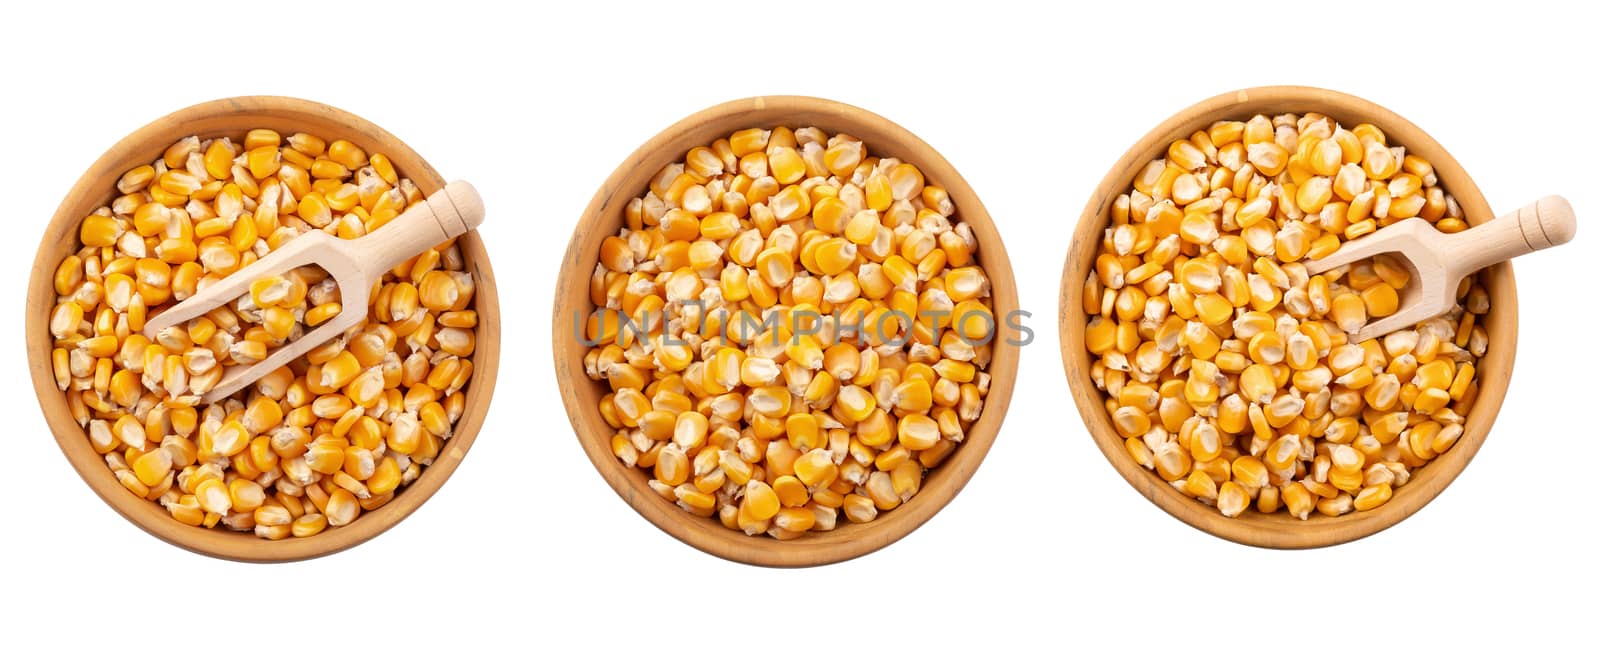 Corn seeds in a wooden bowl isolated on white background by kaiskynet